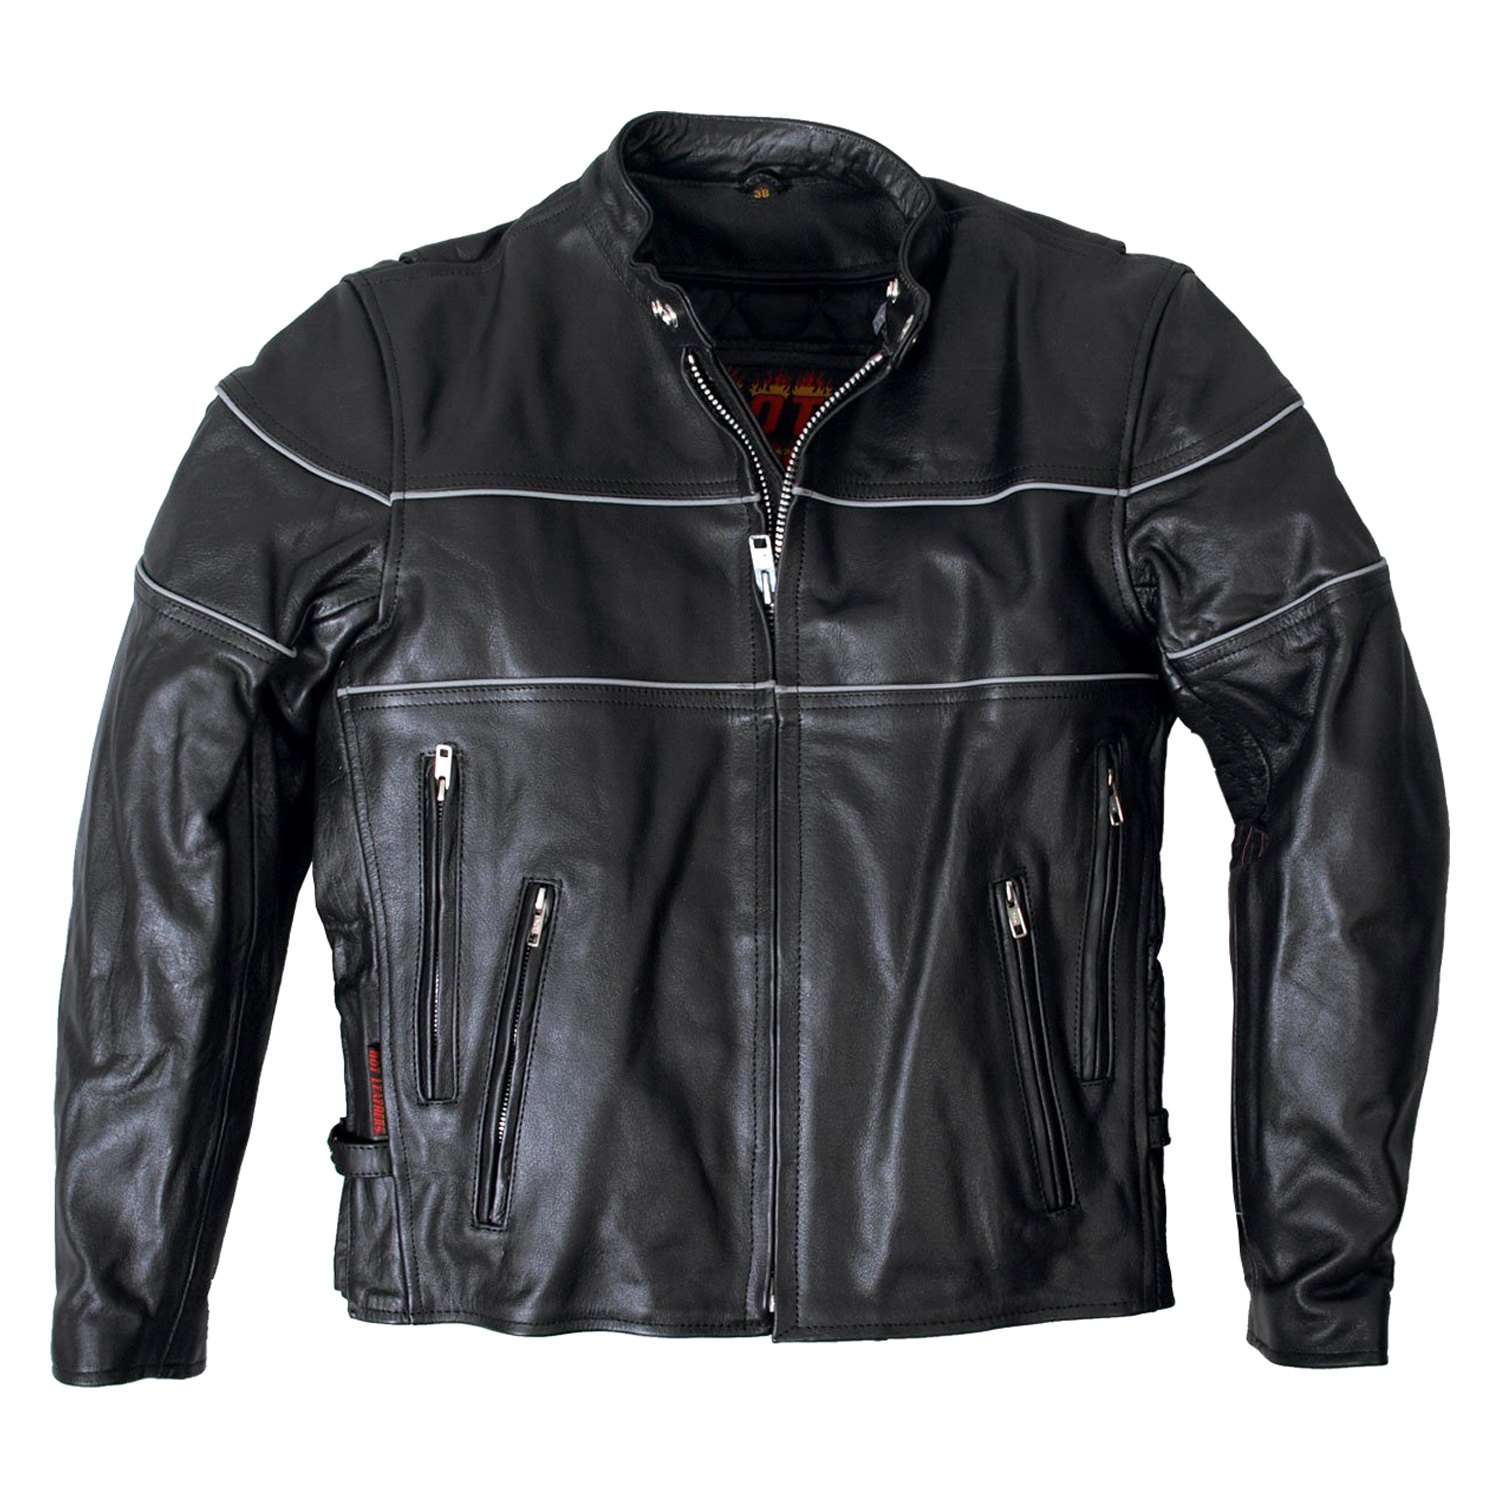 Hot Leathers® 20917 - Men's Leather Jacket with Reflective Piping 